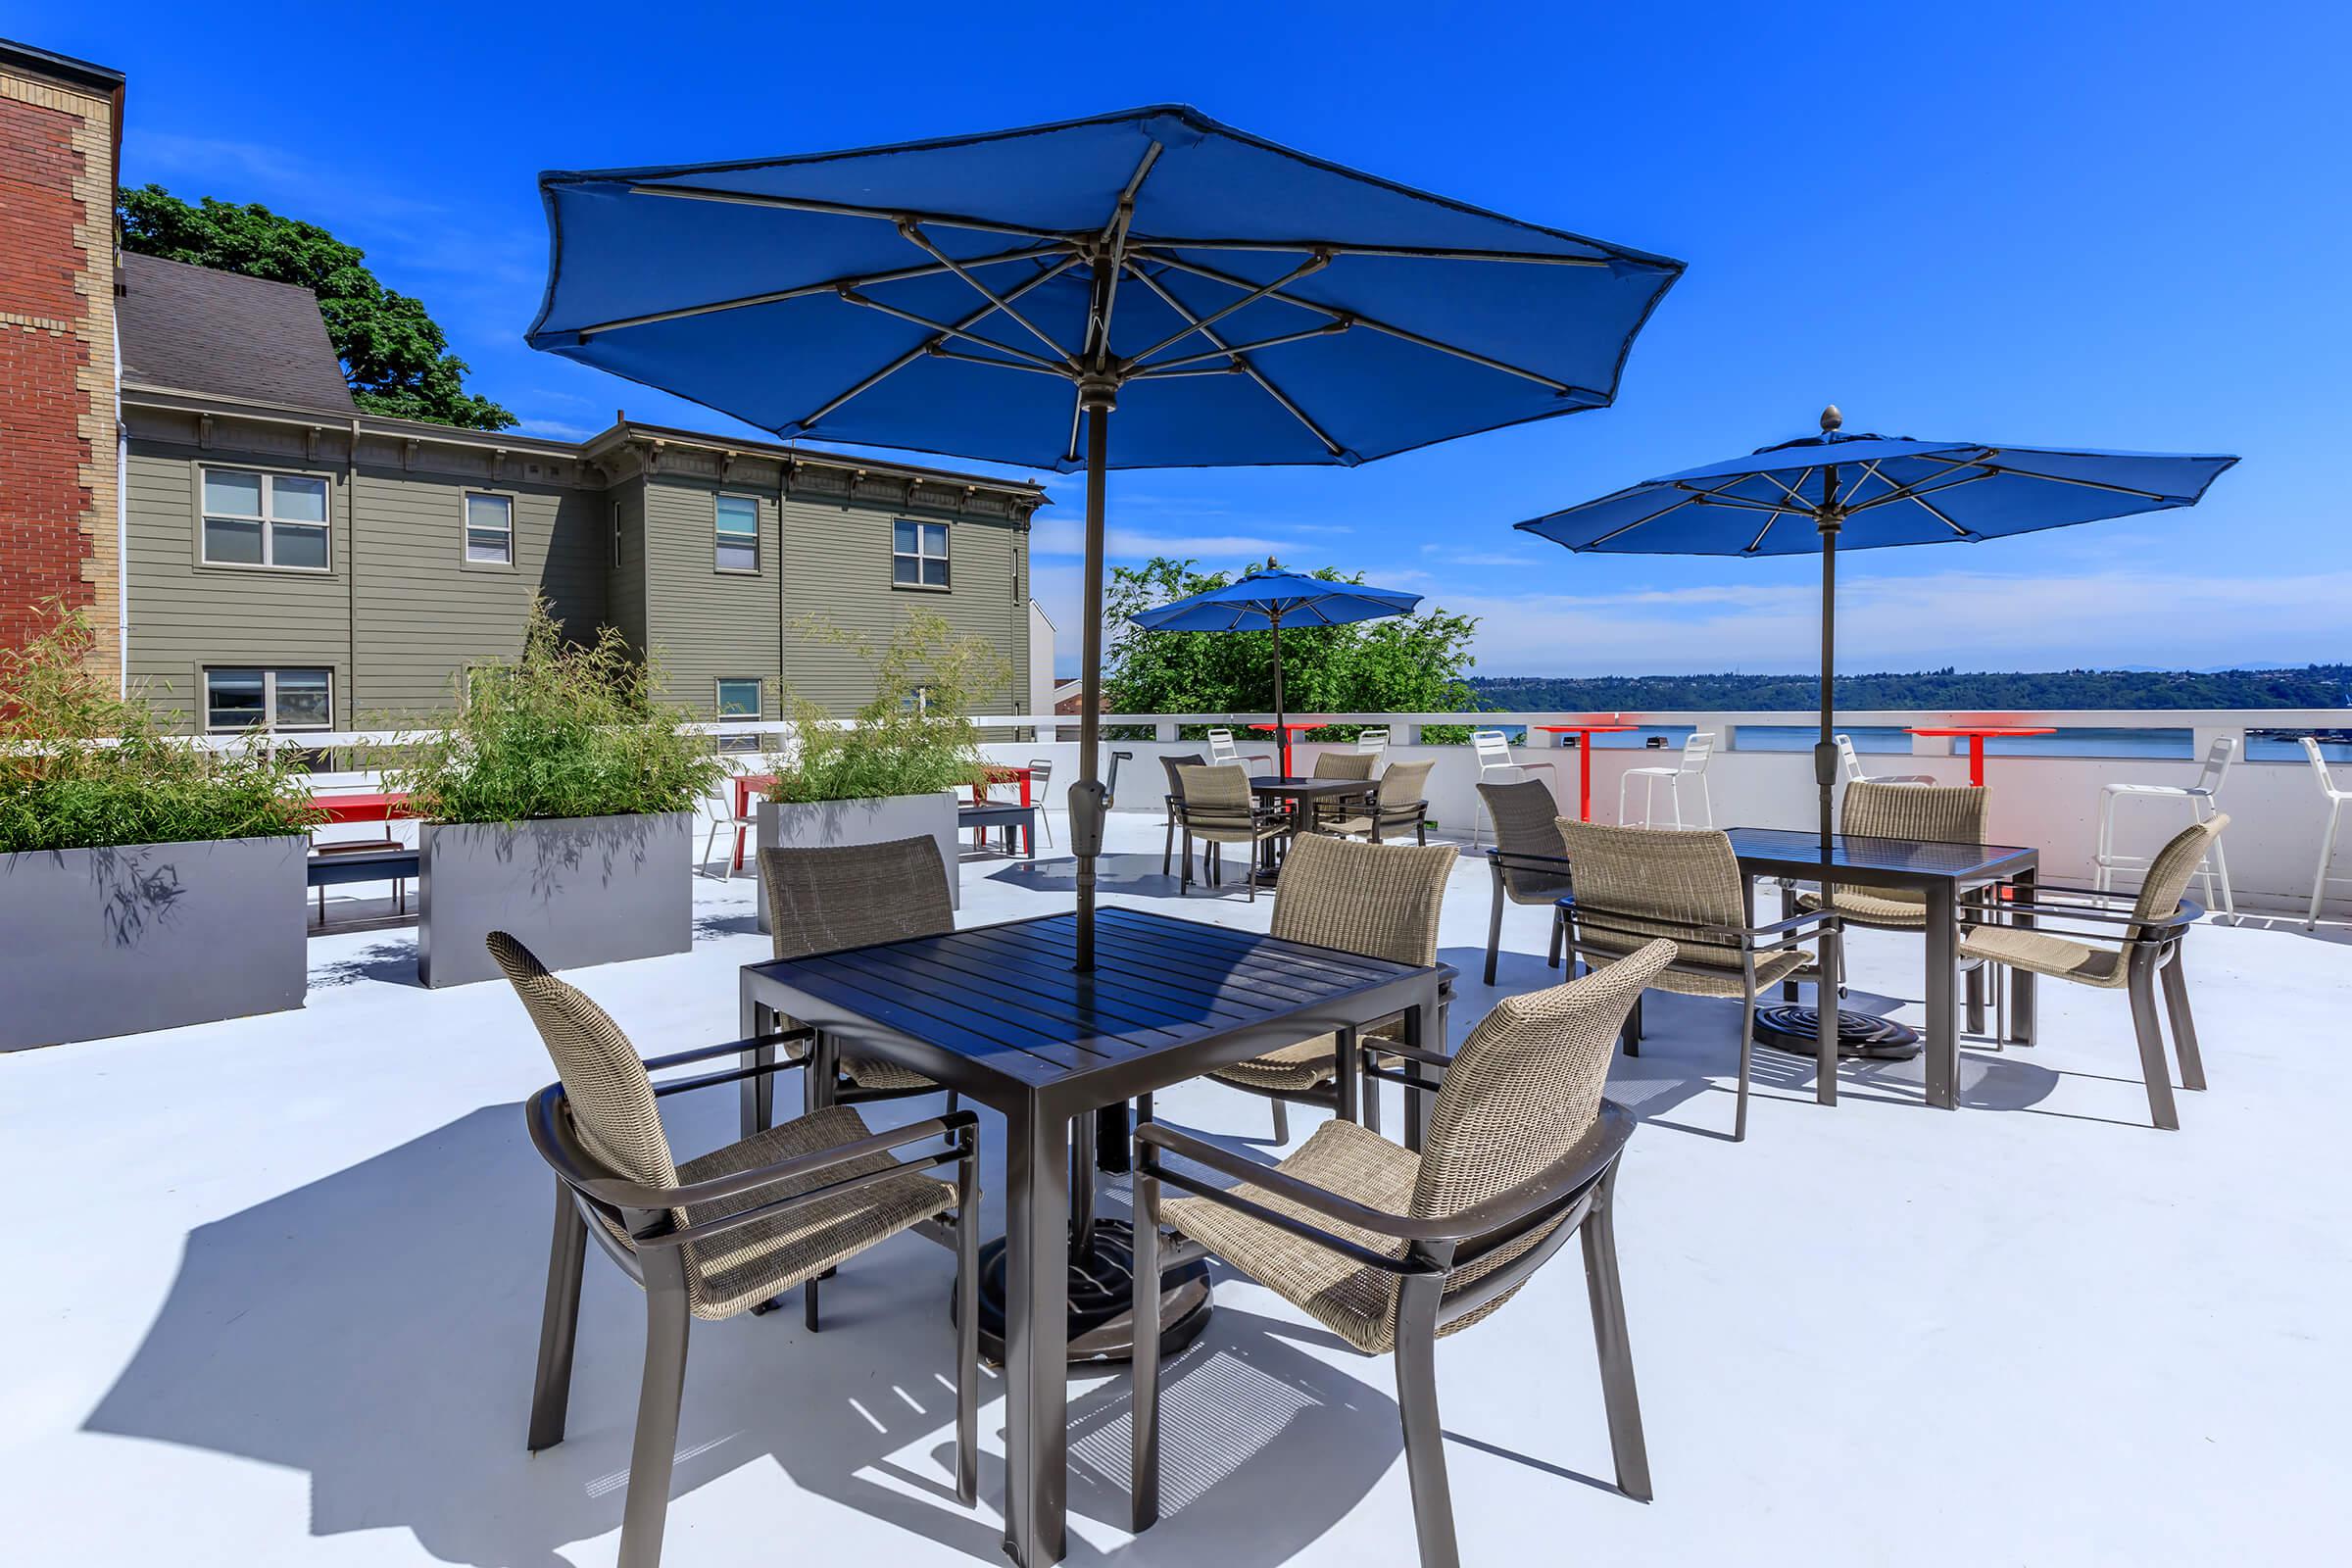 Pet-Friendly Apartments In Tacoma - Rooftop Lounge Area With Patio Tables and Chairs Plus Spectacular Views